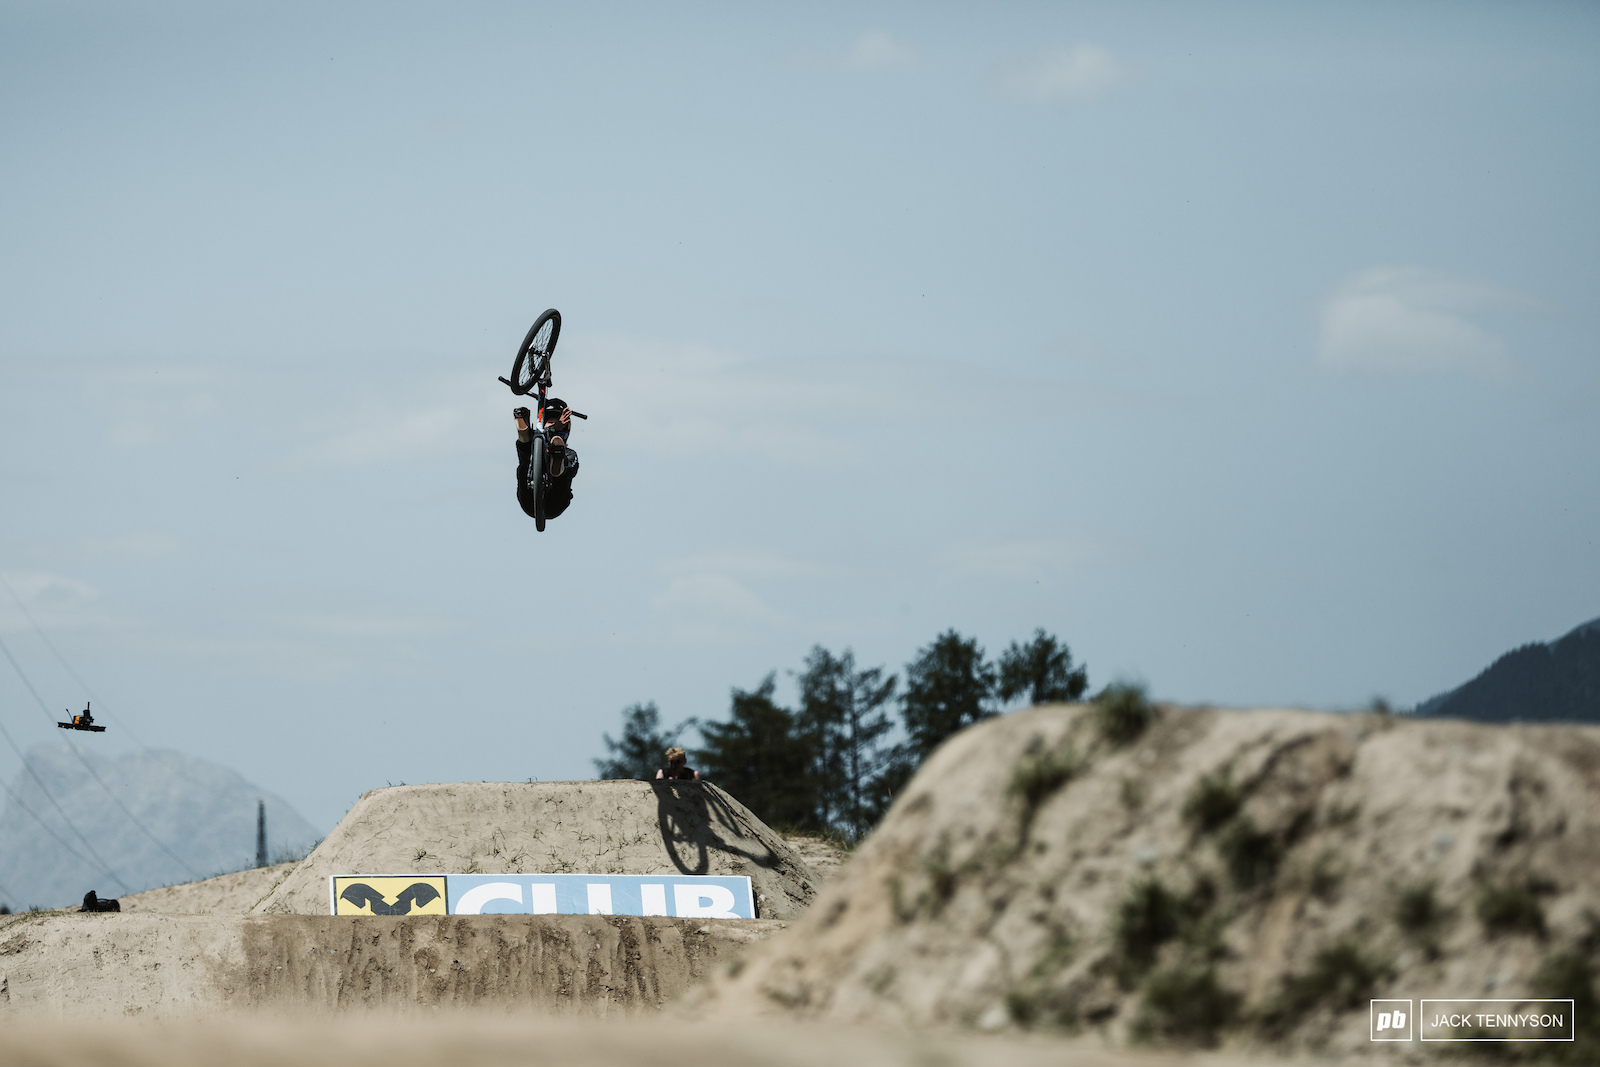 A day filled with big jumps.